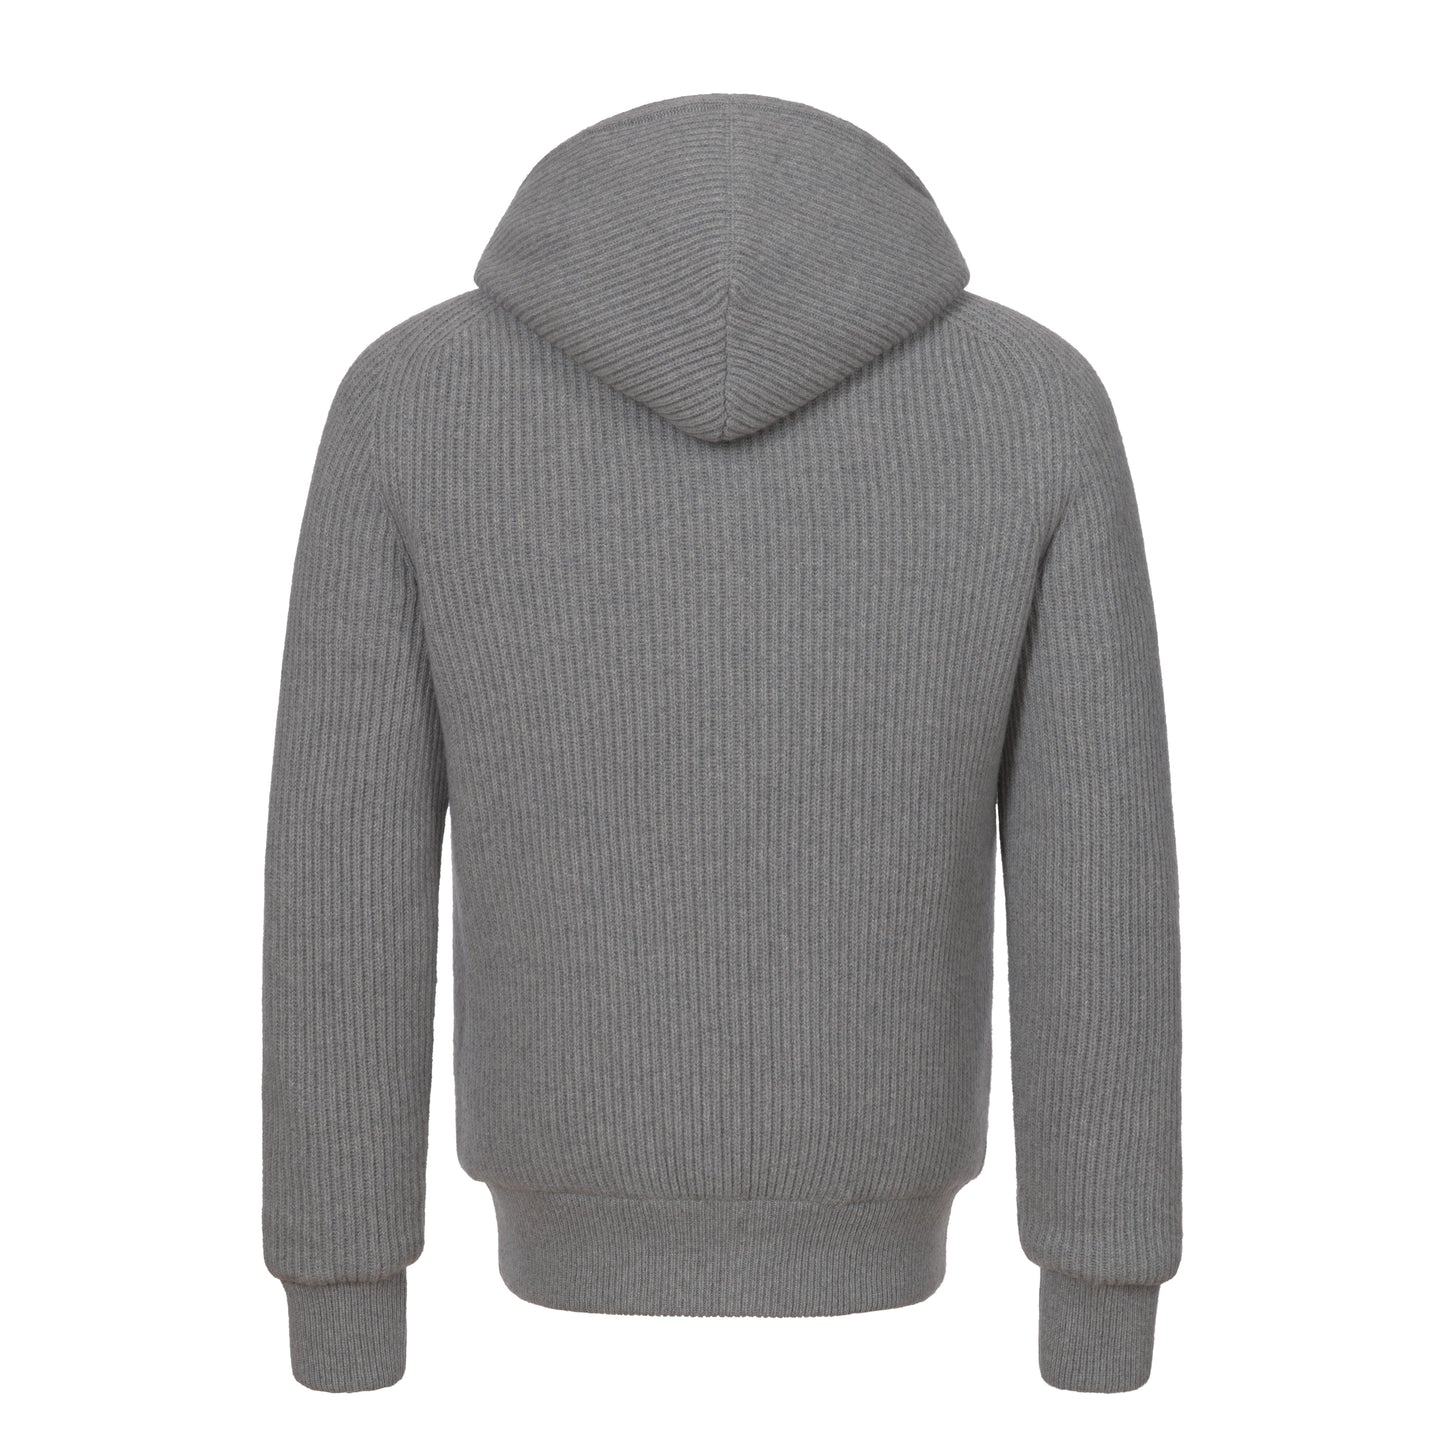 Cashmere and Wool Hooded Jacket in Grey Melange